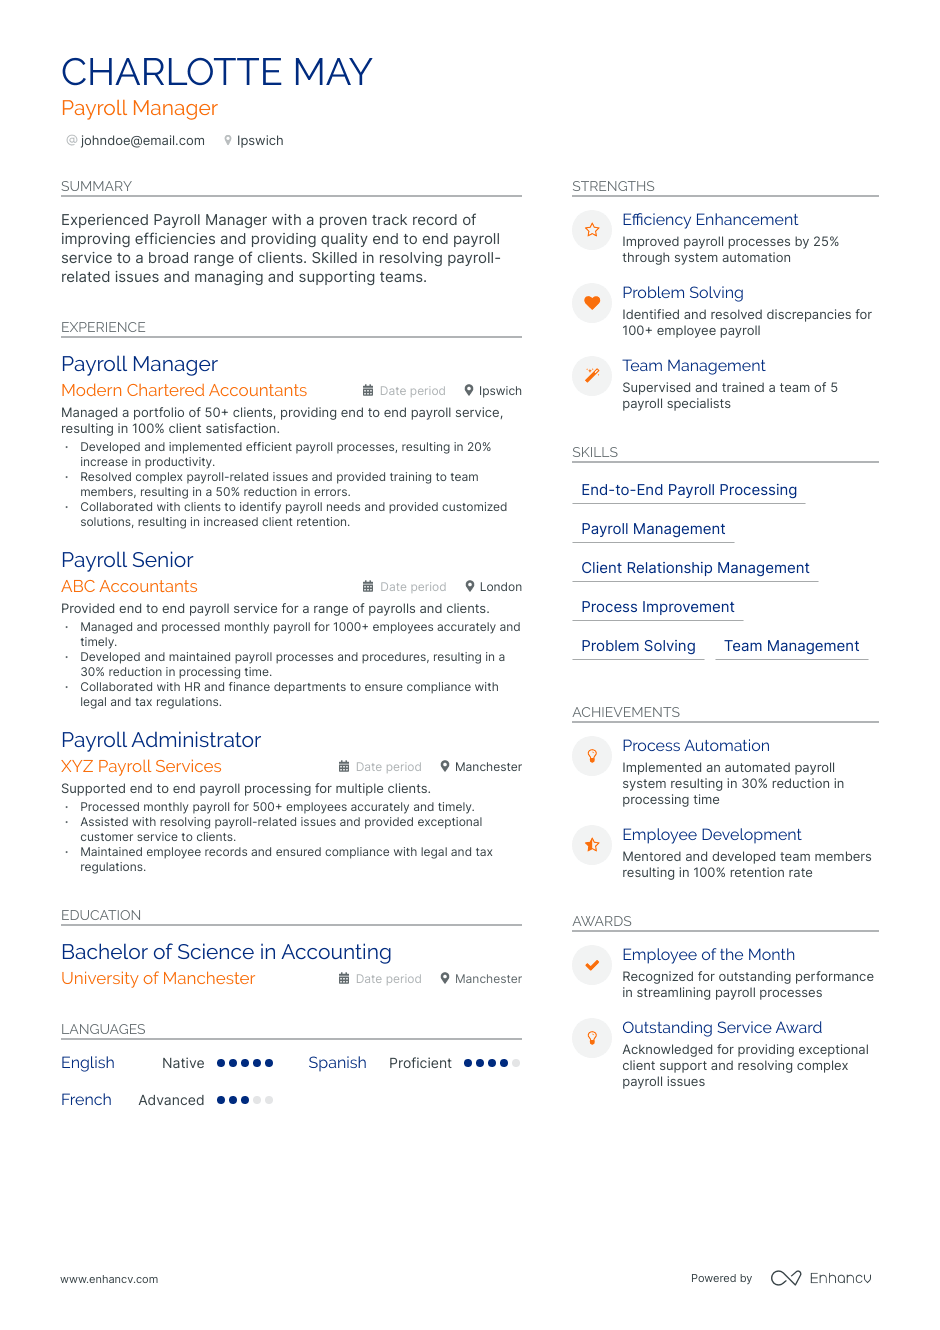 Payroll Manager resume example